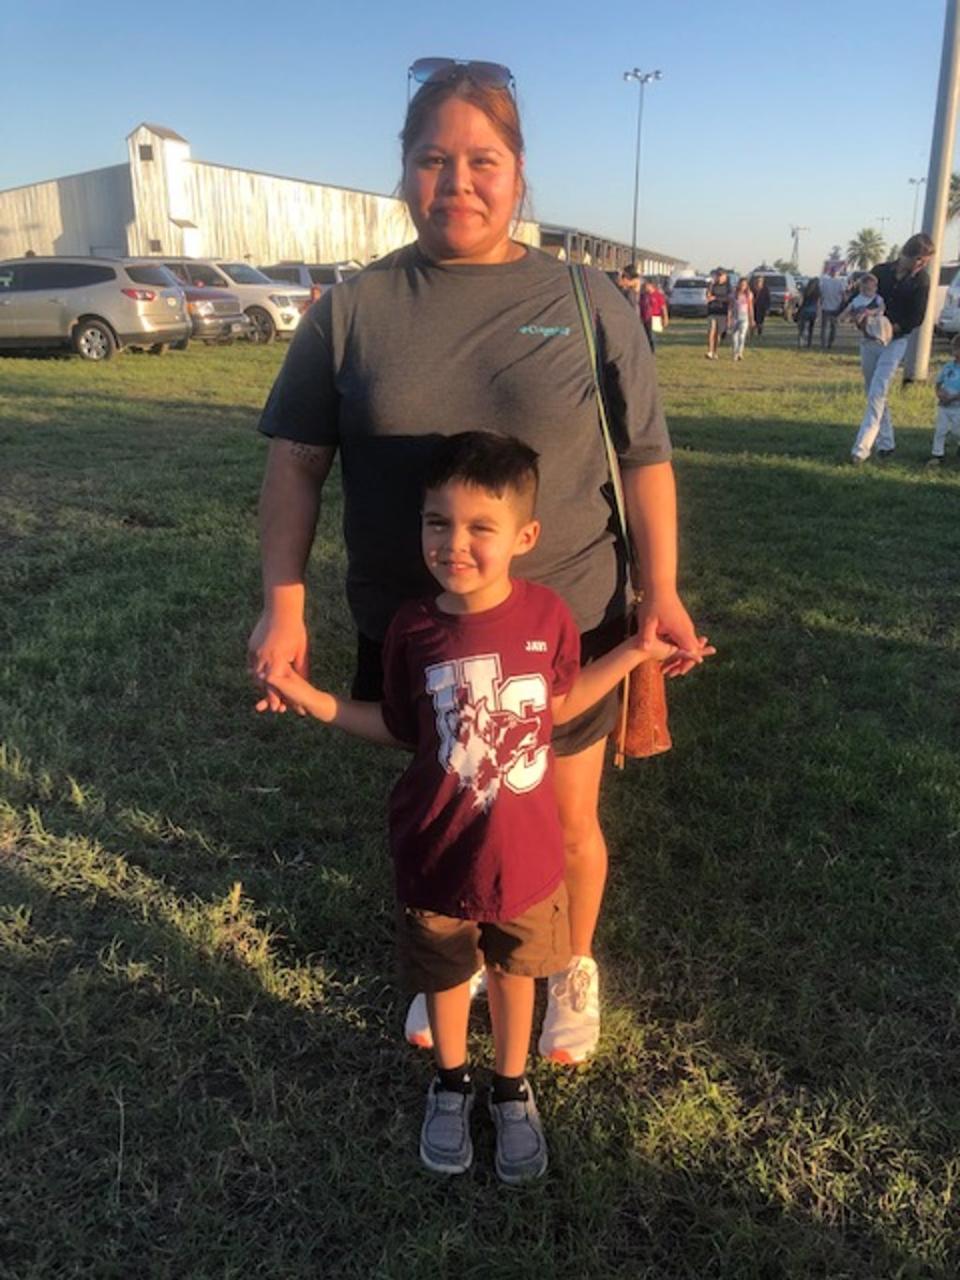 Brianna Gonzales, 28, picked her fourth-grader up early from Robb Elementary on Tuesday, not long before the shooting started; she stands outside the Uvalde County Fairplex with her younger son, Emilio (Sheila Flynn)